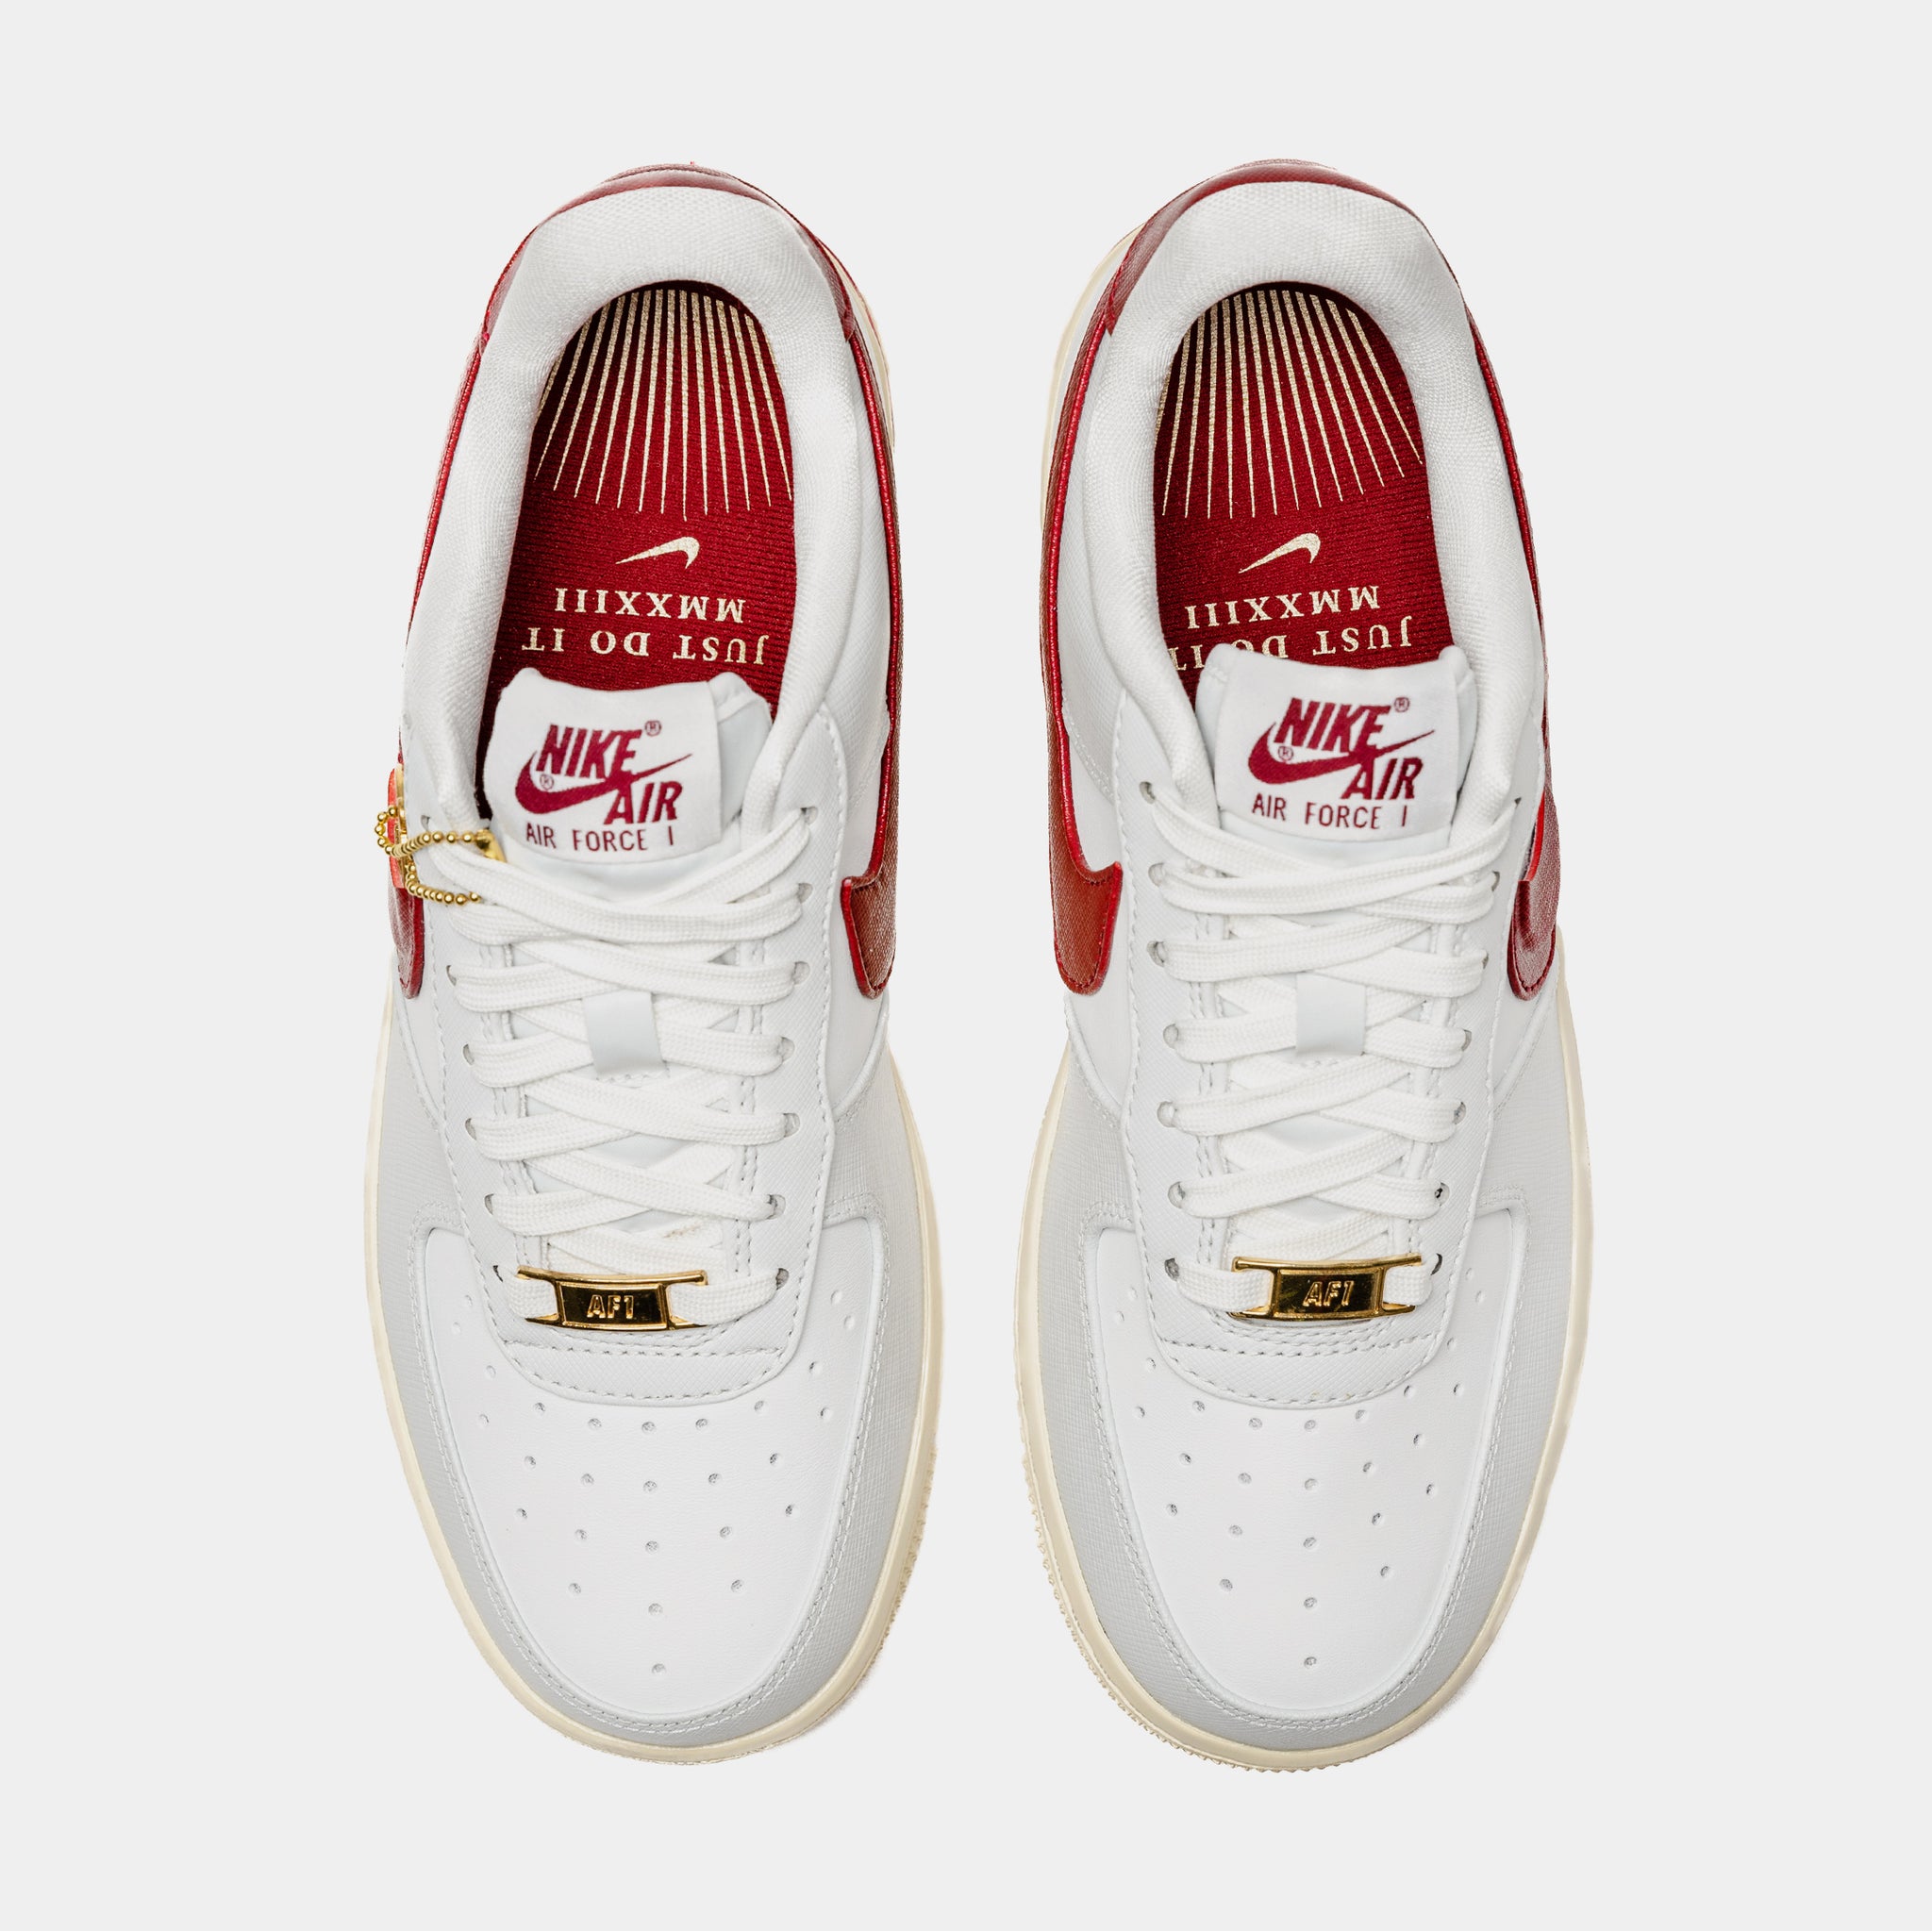 Nike Air Force 1 Low Photon Dust Team Red Womens Lifestyle Shoes